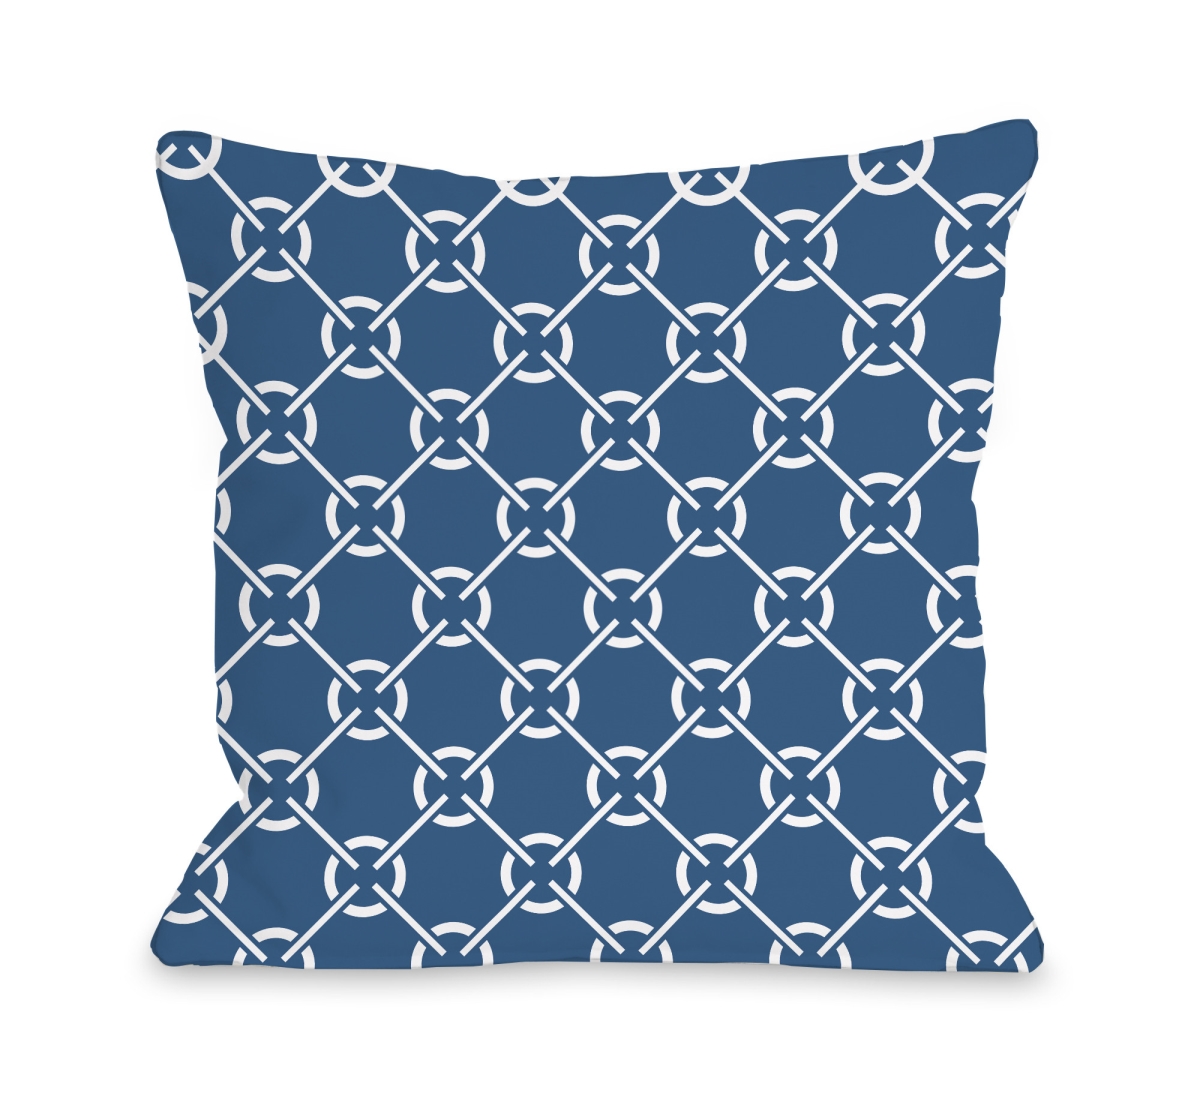 16 X 16 In. Ceciles Circles Pillow, Mykonos Blue